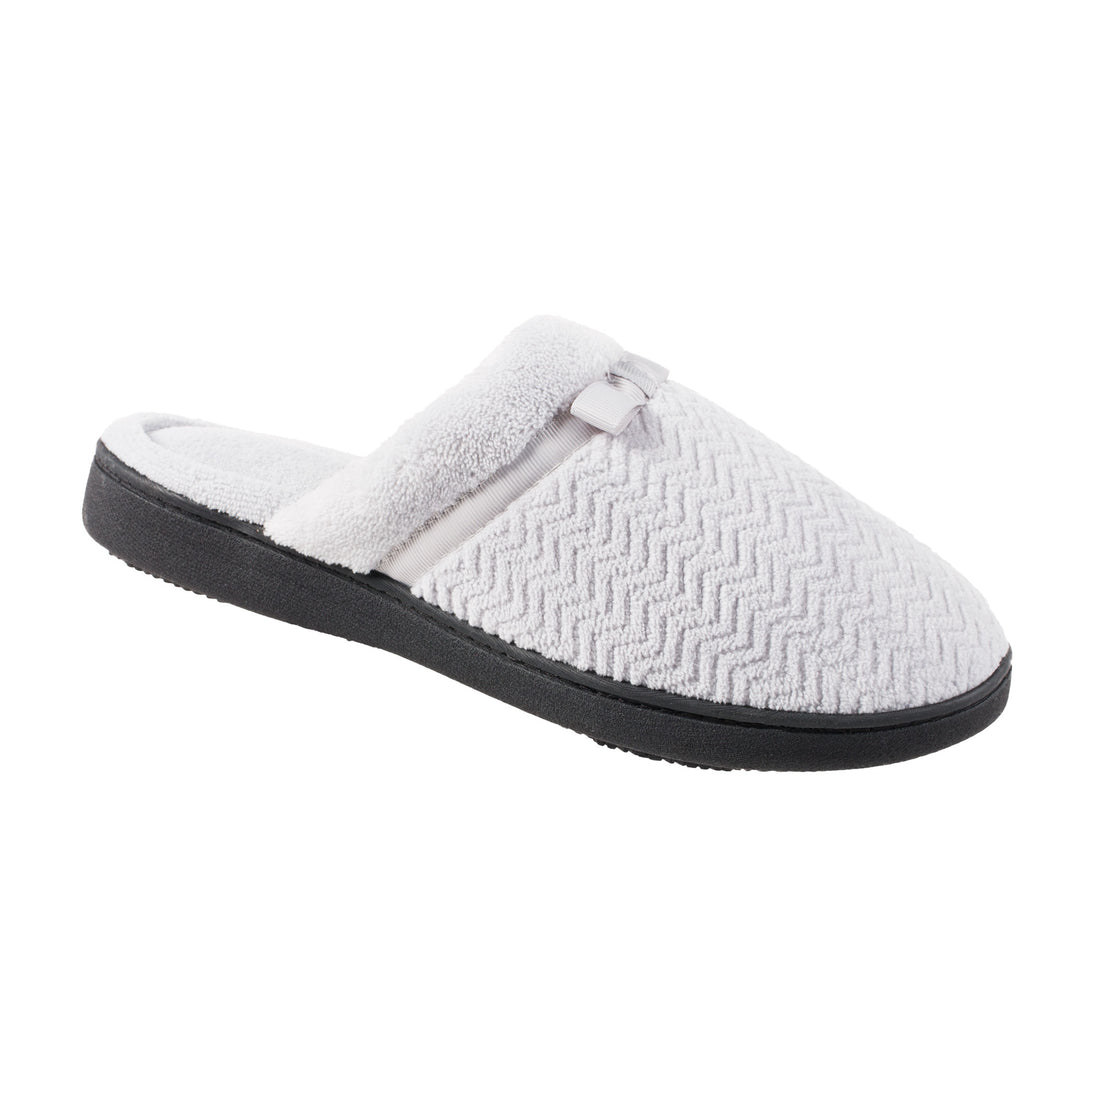 Fully Adjustable Ladies Slippers (QINGD32007) by Pavers @ Pavers Shoes -  Your Perfect Style.